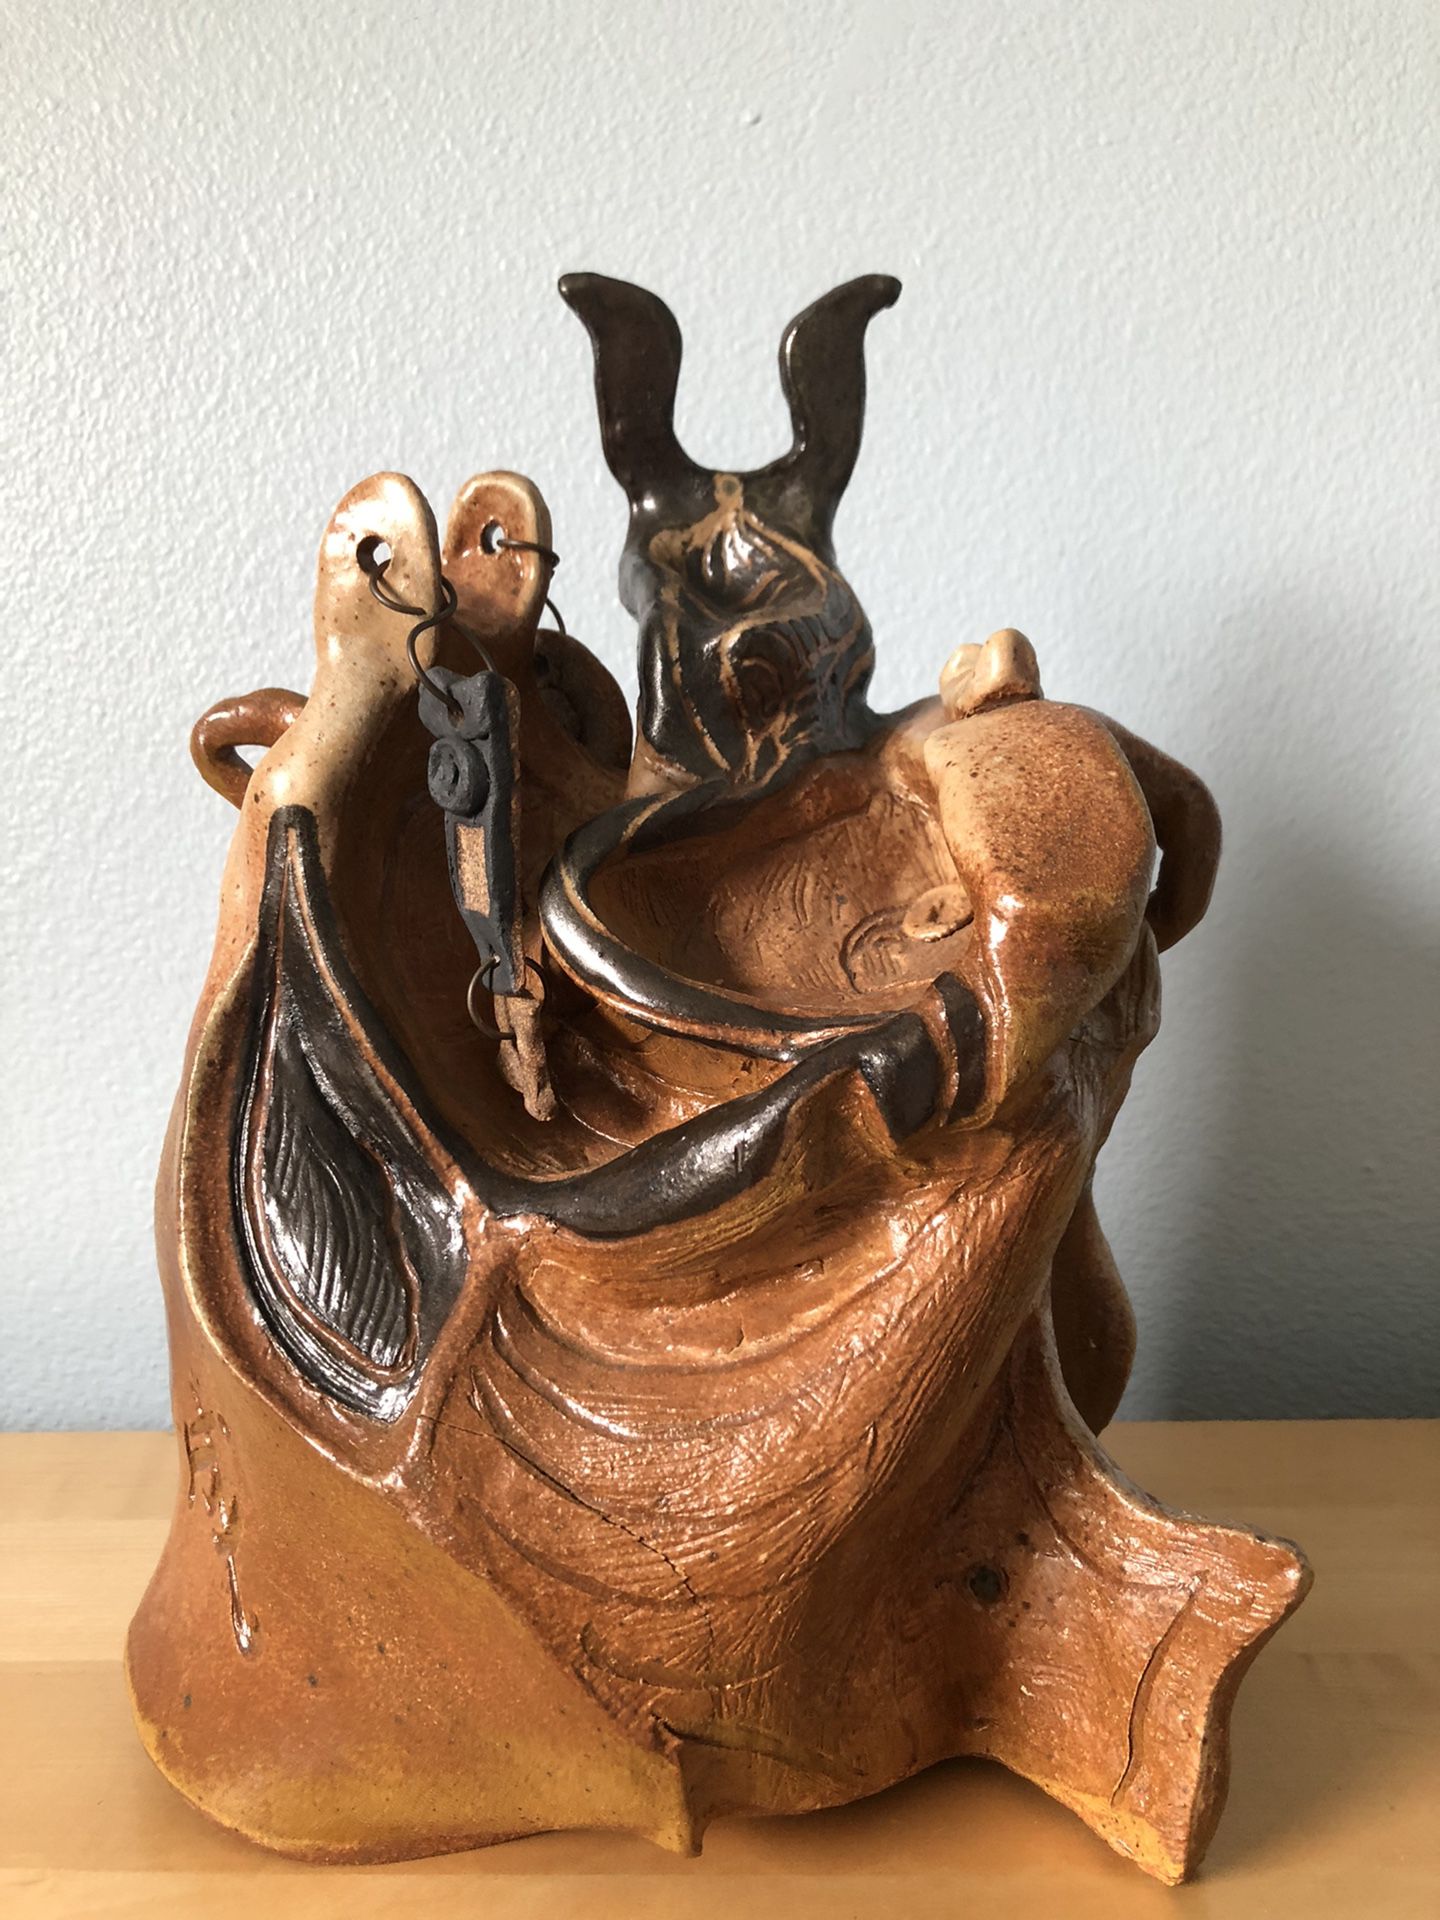 Unique Jackie Woodward Pottery Sculpture Carving, Foreign Steel “Success” Signed